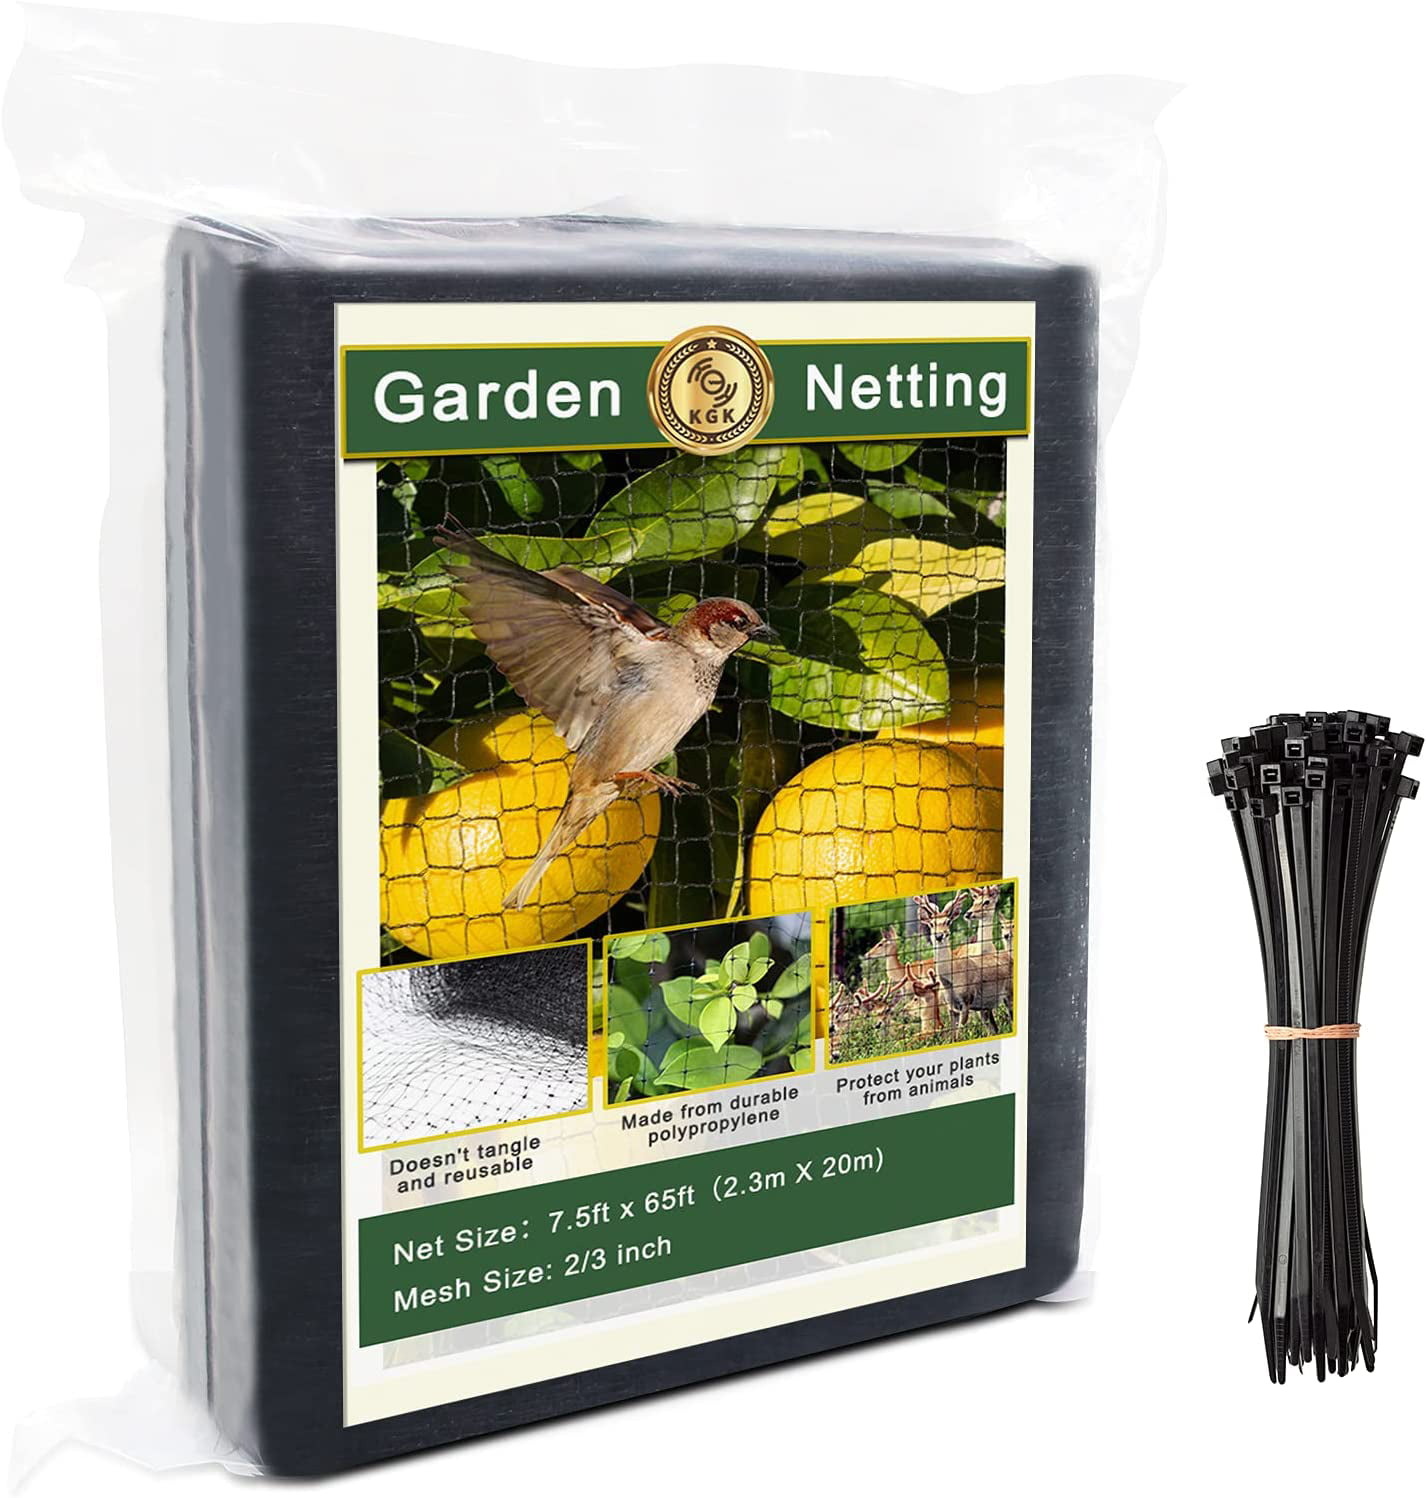 Bldaxn Green Anti Bird Netting Garden Protection Mesh Netting Reusable Protective Garden Netting for Plants Fruit Trees Against Birds,Deer and Other Animals,Netting Fence 13Ft x 50Ft 